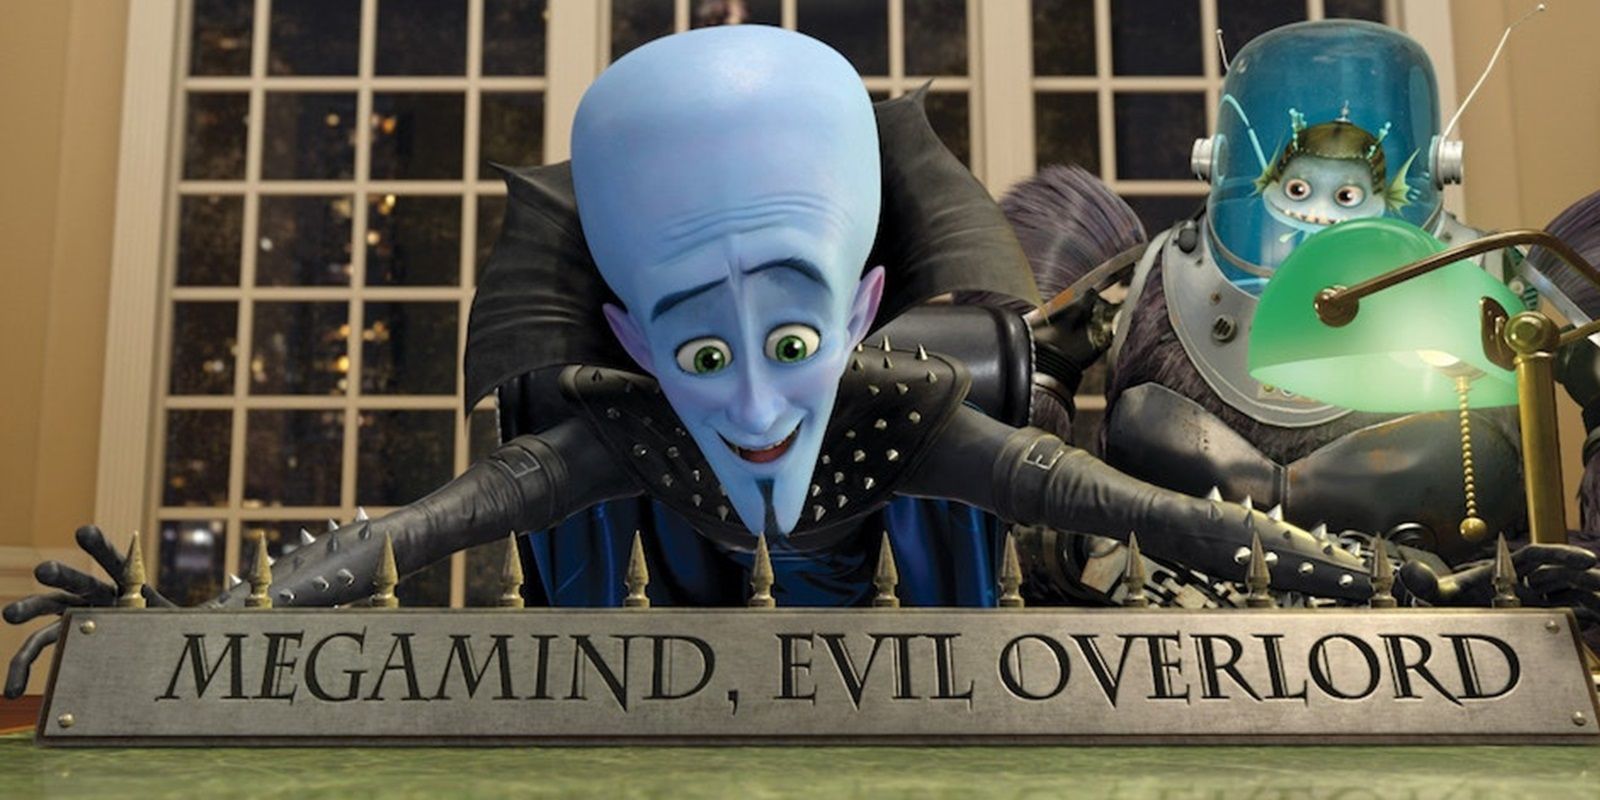 Megamind puts a name plate on his desk